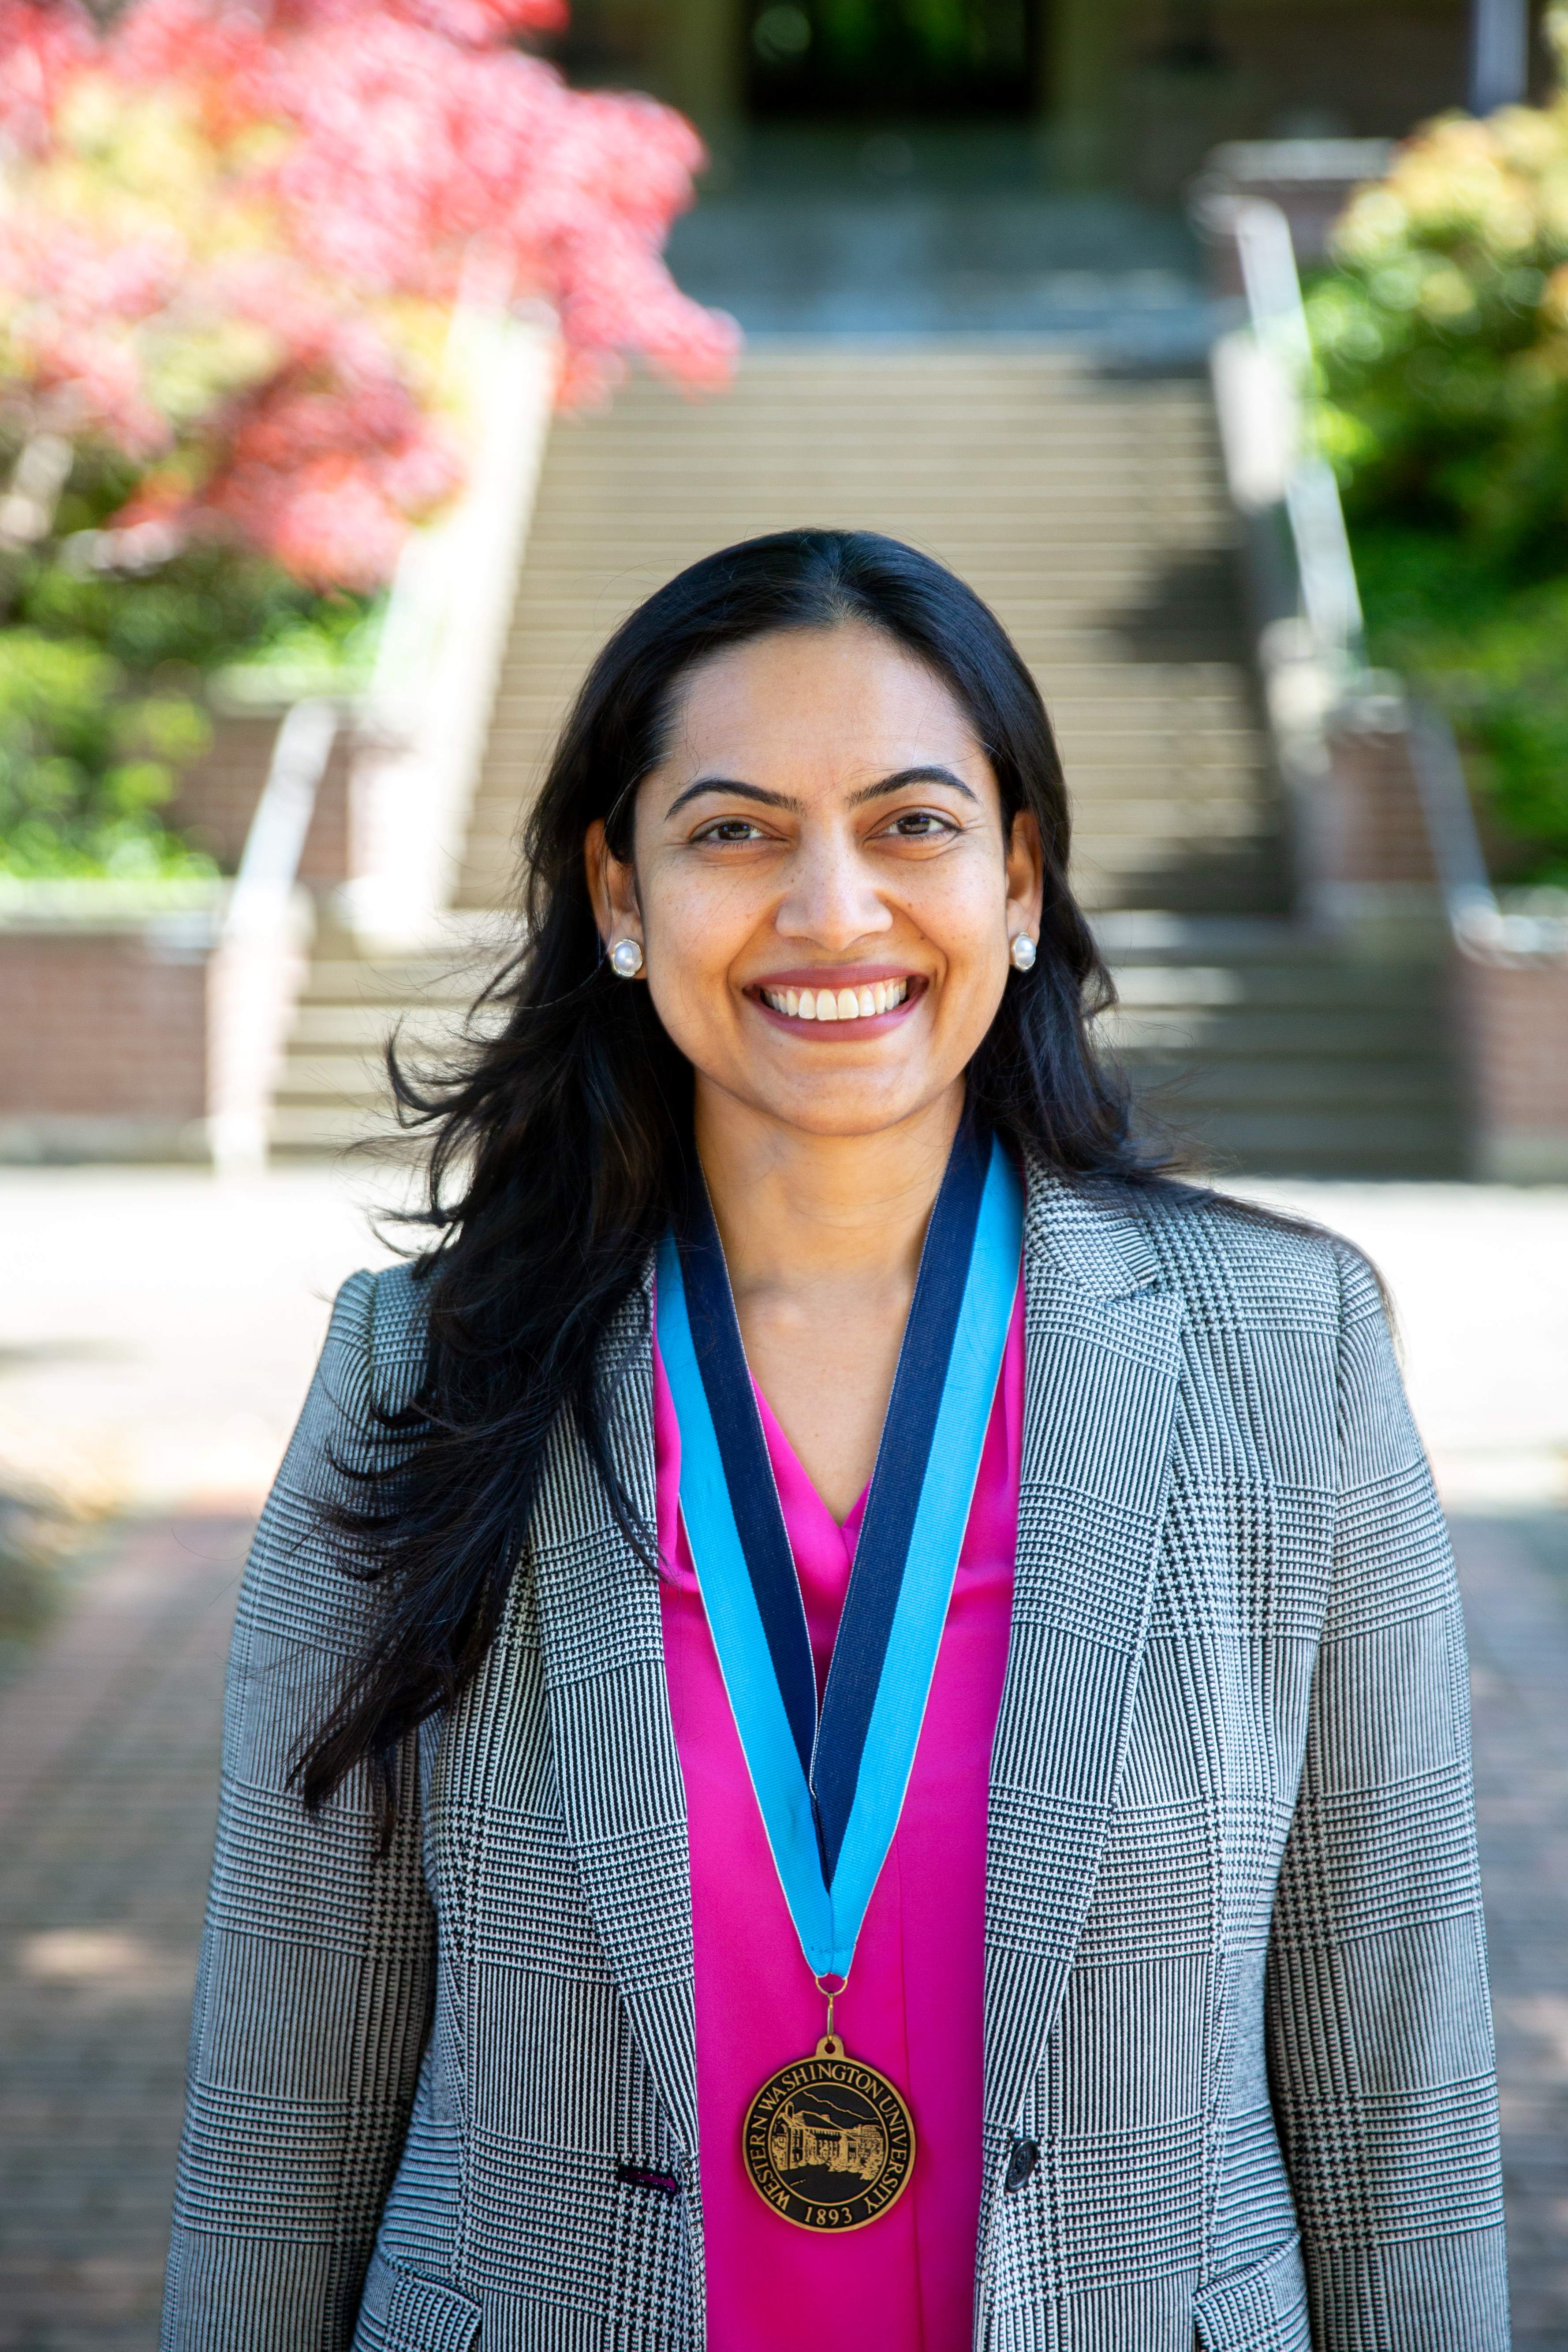 Meg Warren smiling proudly wearing a vivid pink blouse and plaid jacket with a WWU award medallion on a neck ribbon